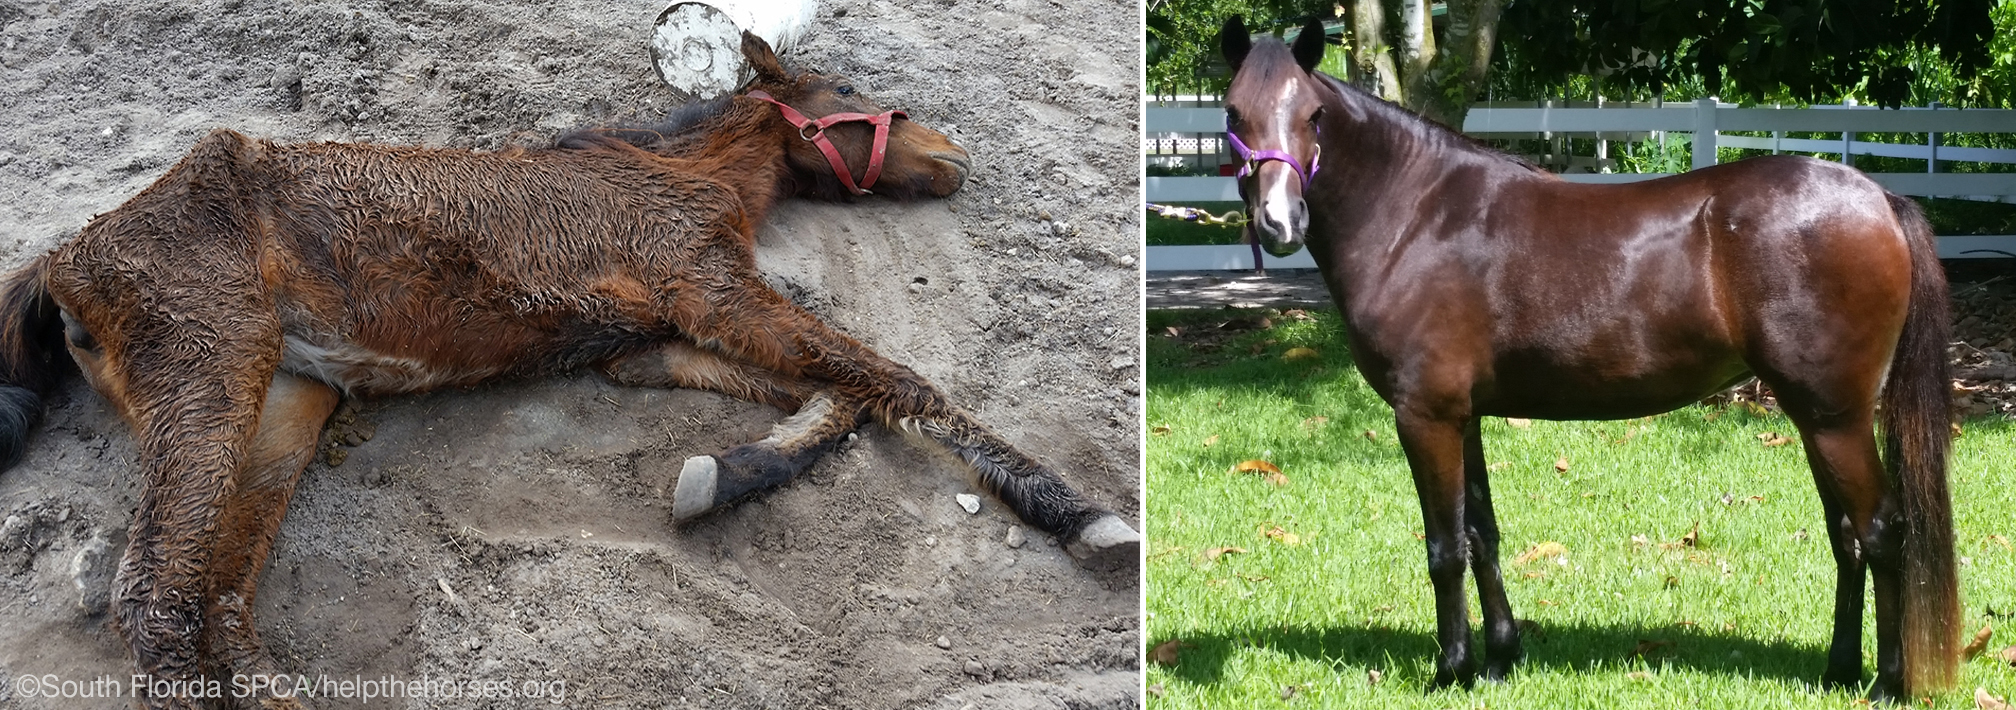 FROM DYING IN THE DIRT TO LIVING THE DREAM | South Florida SPCA | Horse Rescue